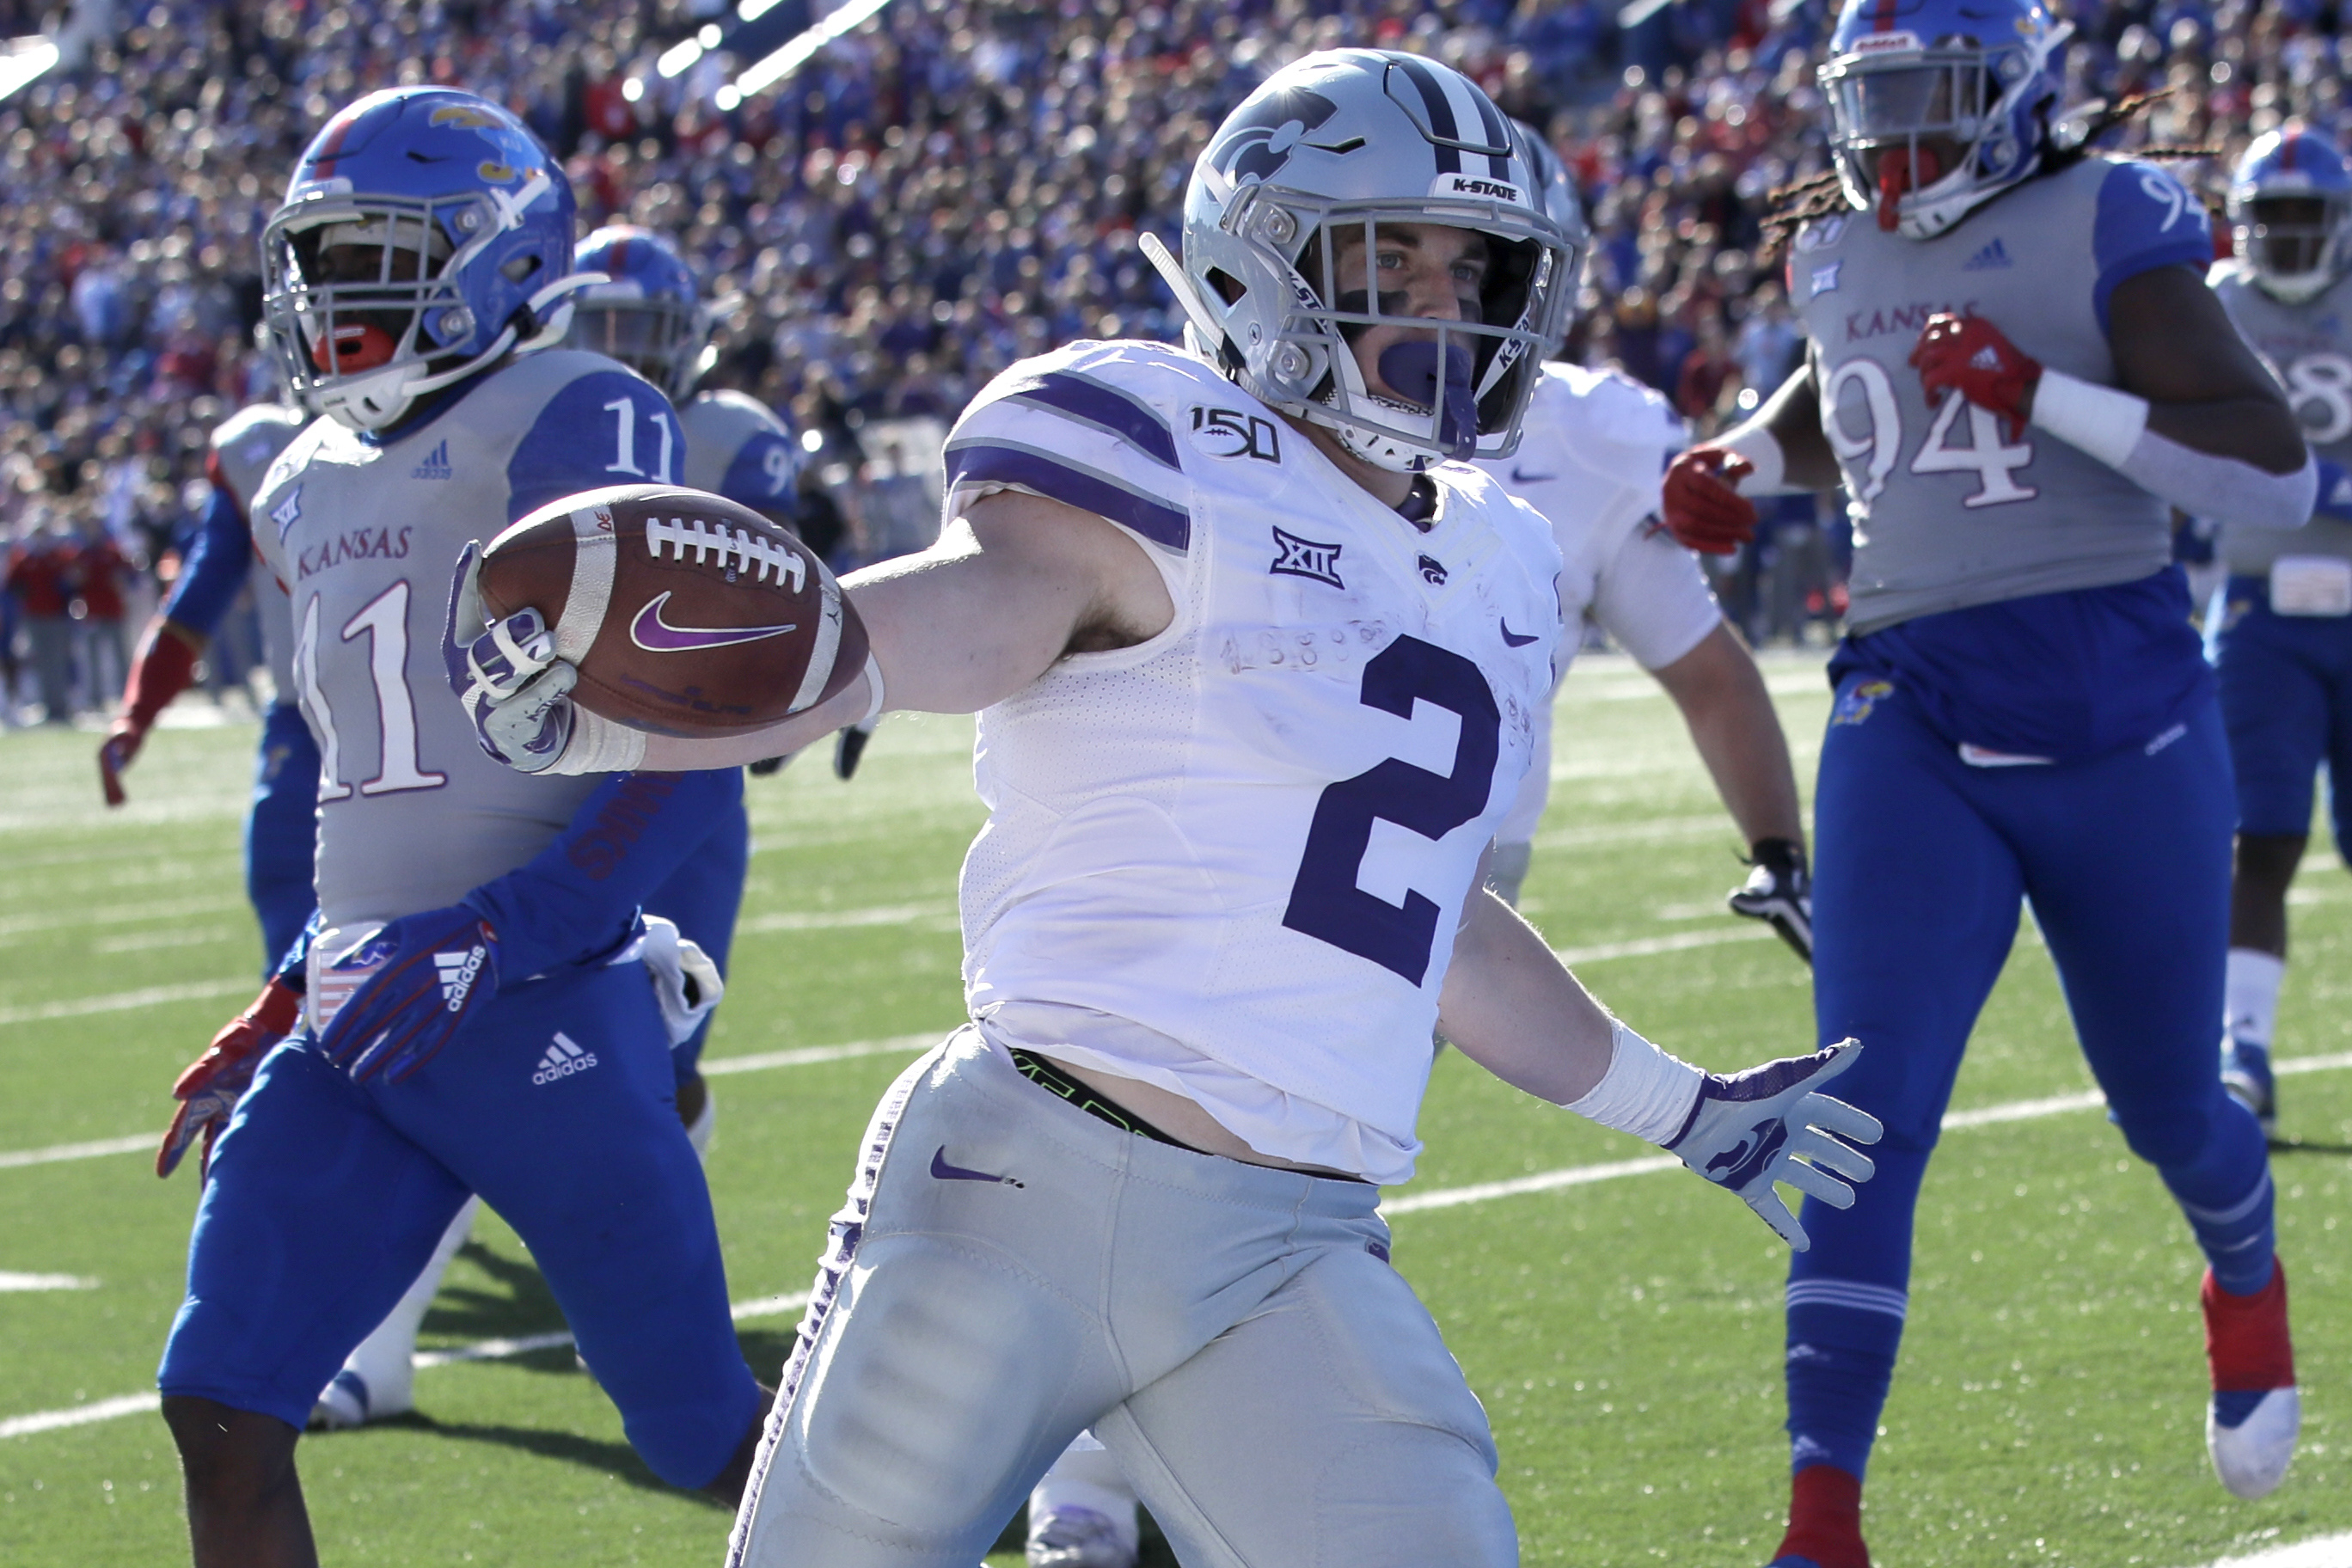 Thompson runs for 3 TDs as No. 22 K-State routs Kansas 38-10